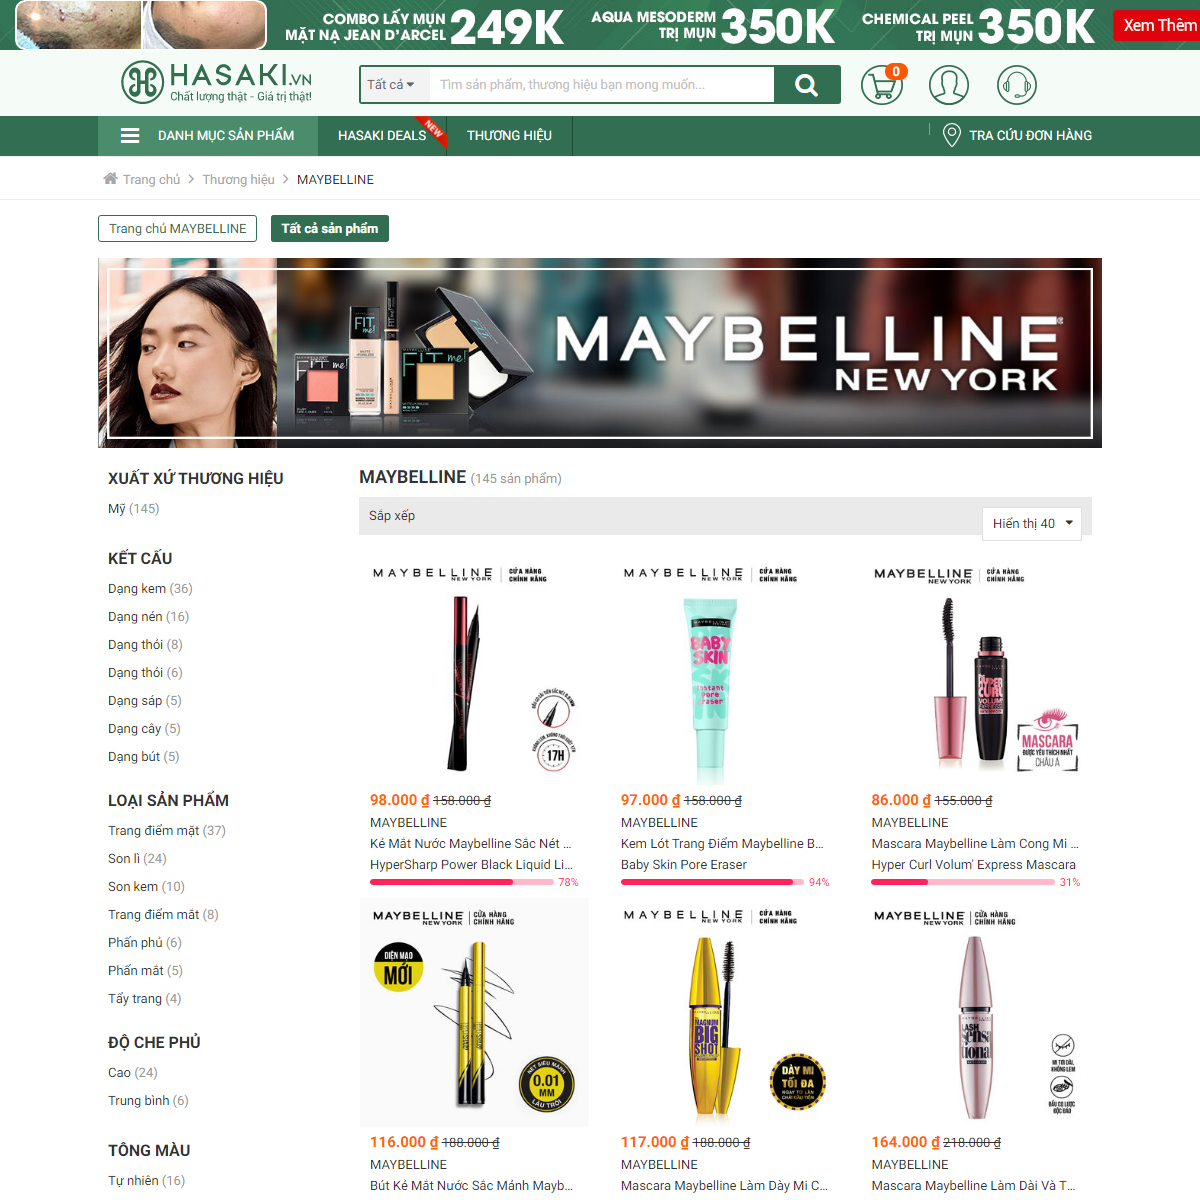 A complete backup of https://hasaki.vn/thuong-hieu/maybelline.html